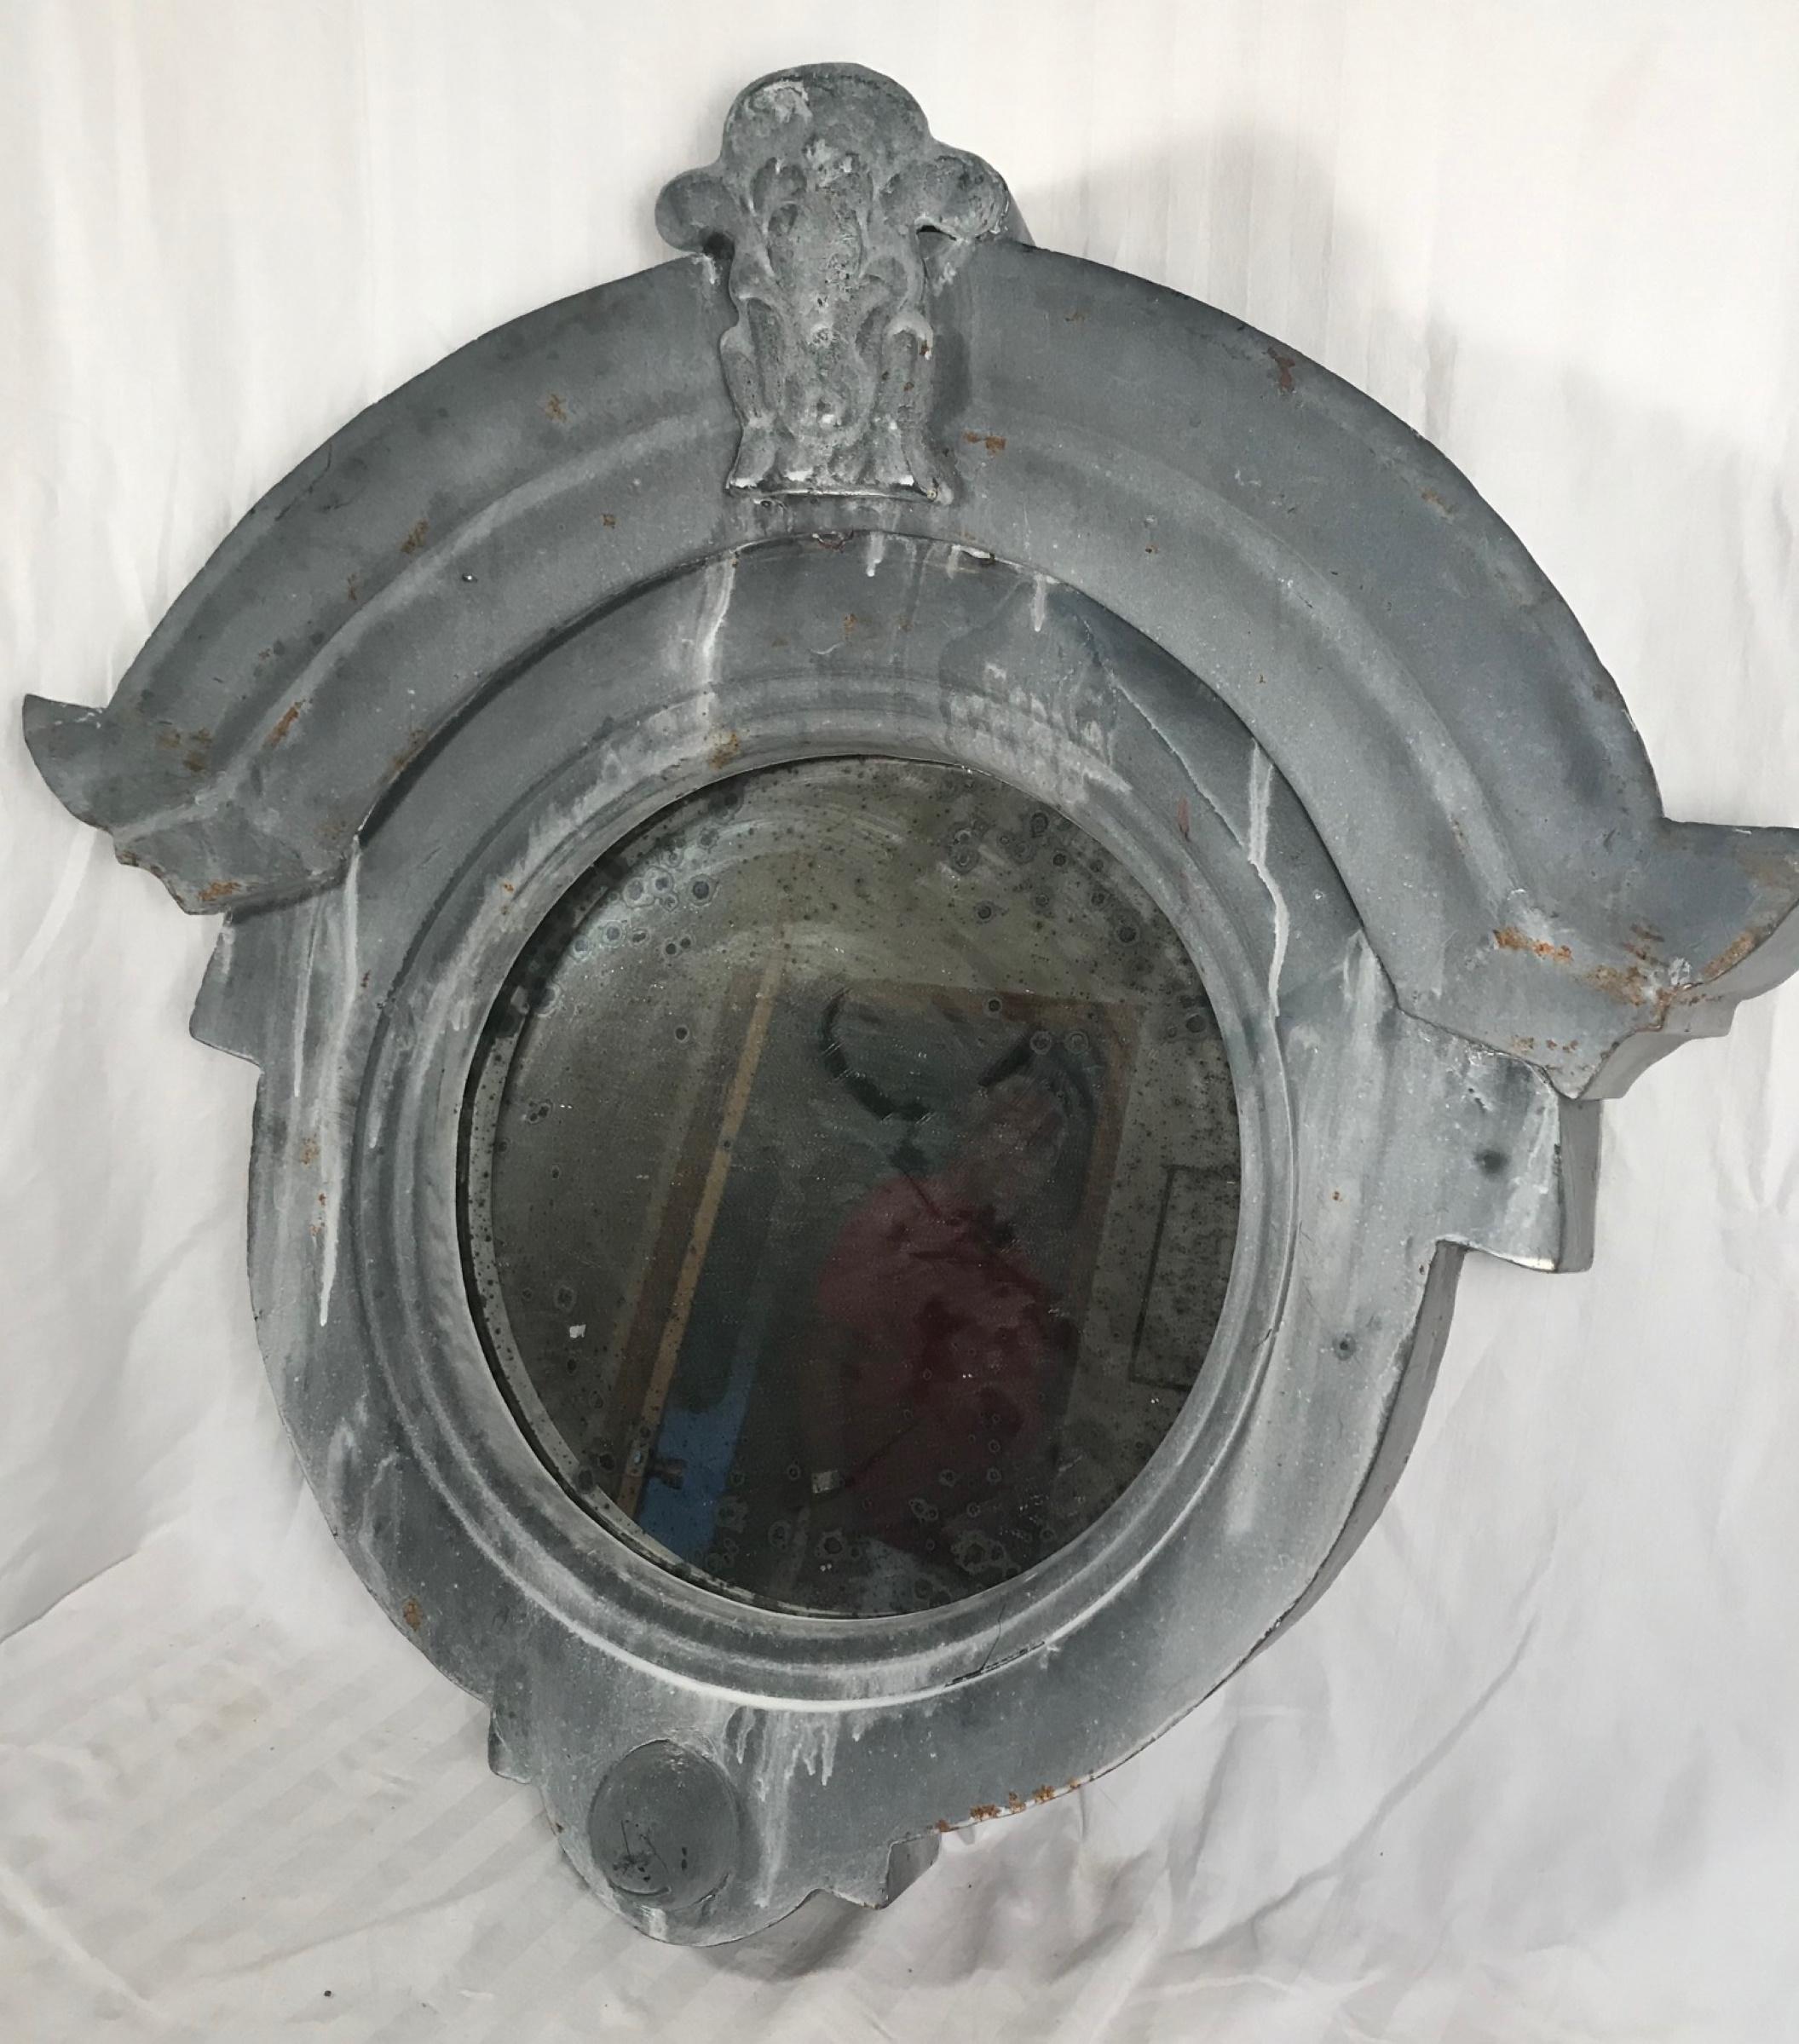 19th century French zinc Oeil De Boeuf, bull’s eye zinc dormer window mirror

This vintage French zinc Oeil De Boeuf dormer window is an architectural salvage element with historic distinction. The majestic windows graces the facades of France’s